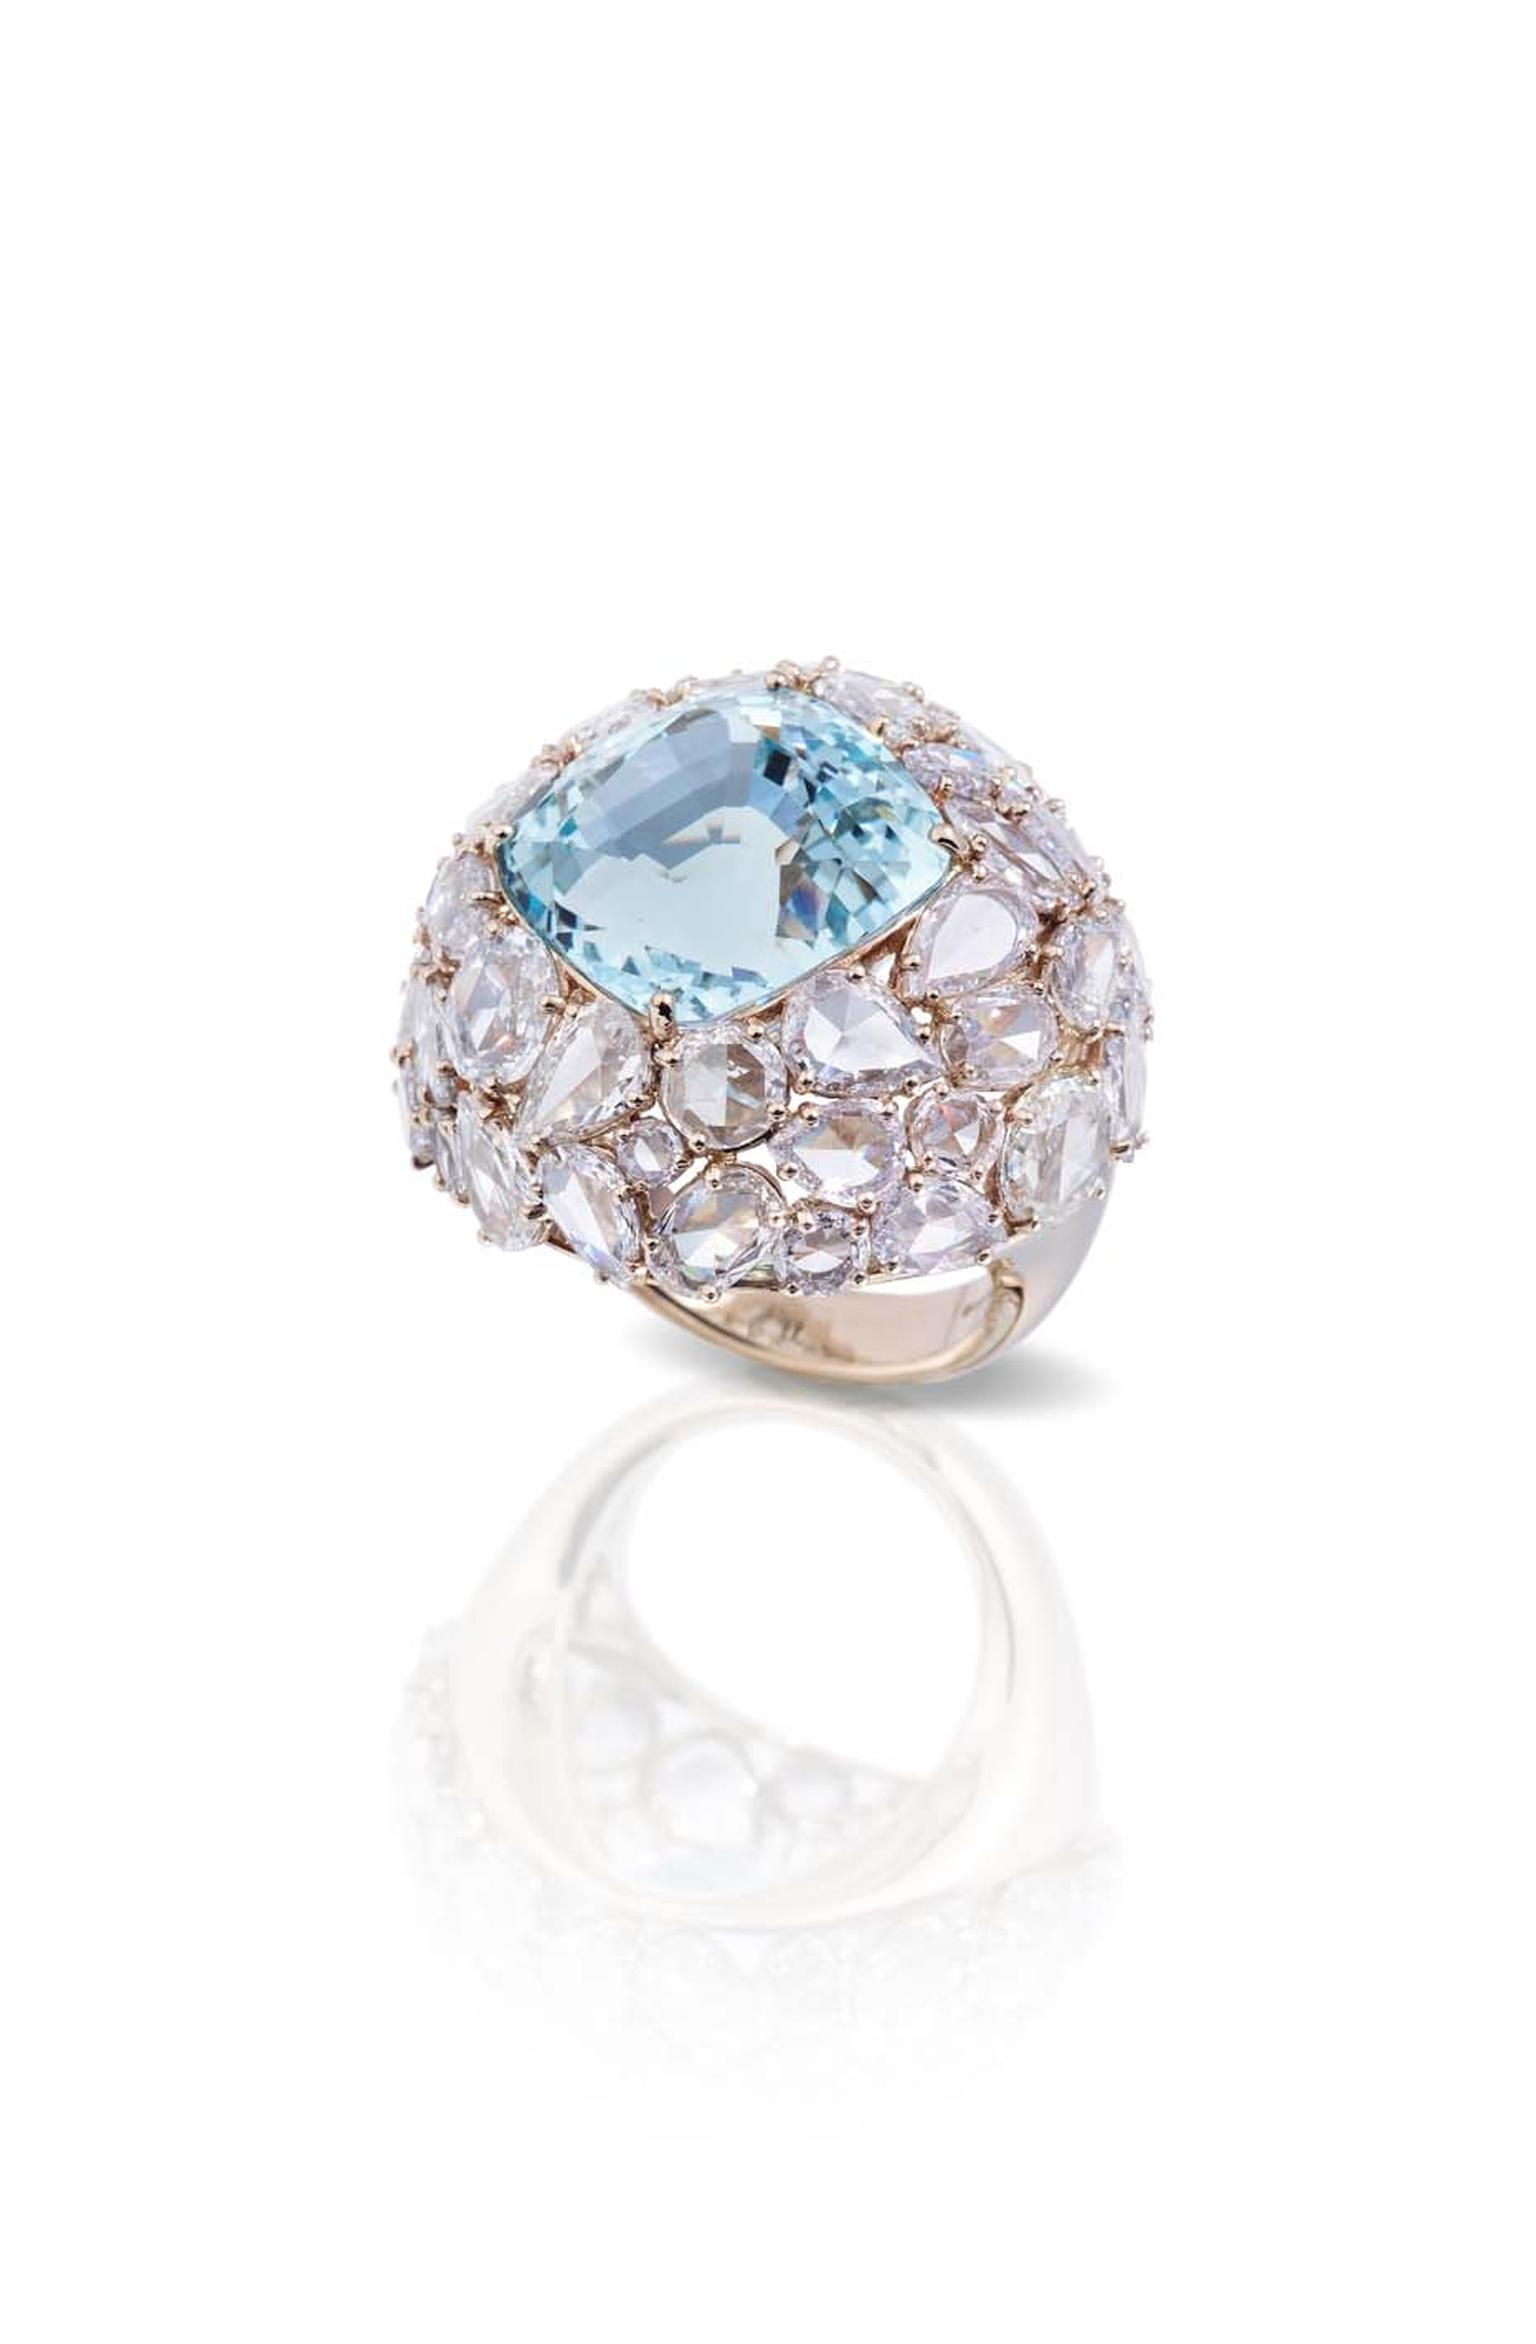 One-of-a-kind Pomellato Pom Pom collection aquamarine ring surrounded by different cuts of diamonds.